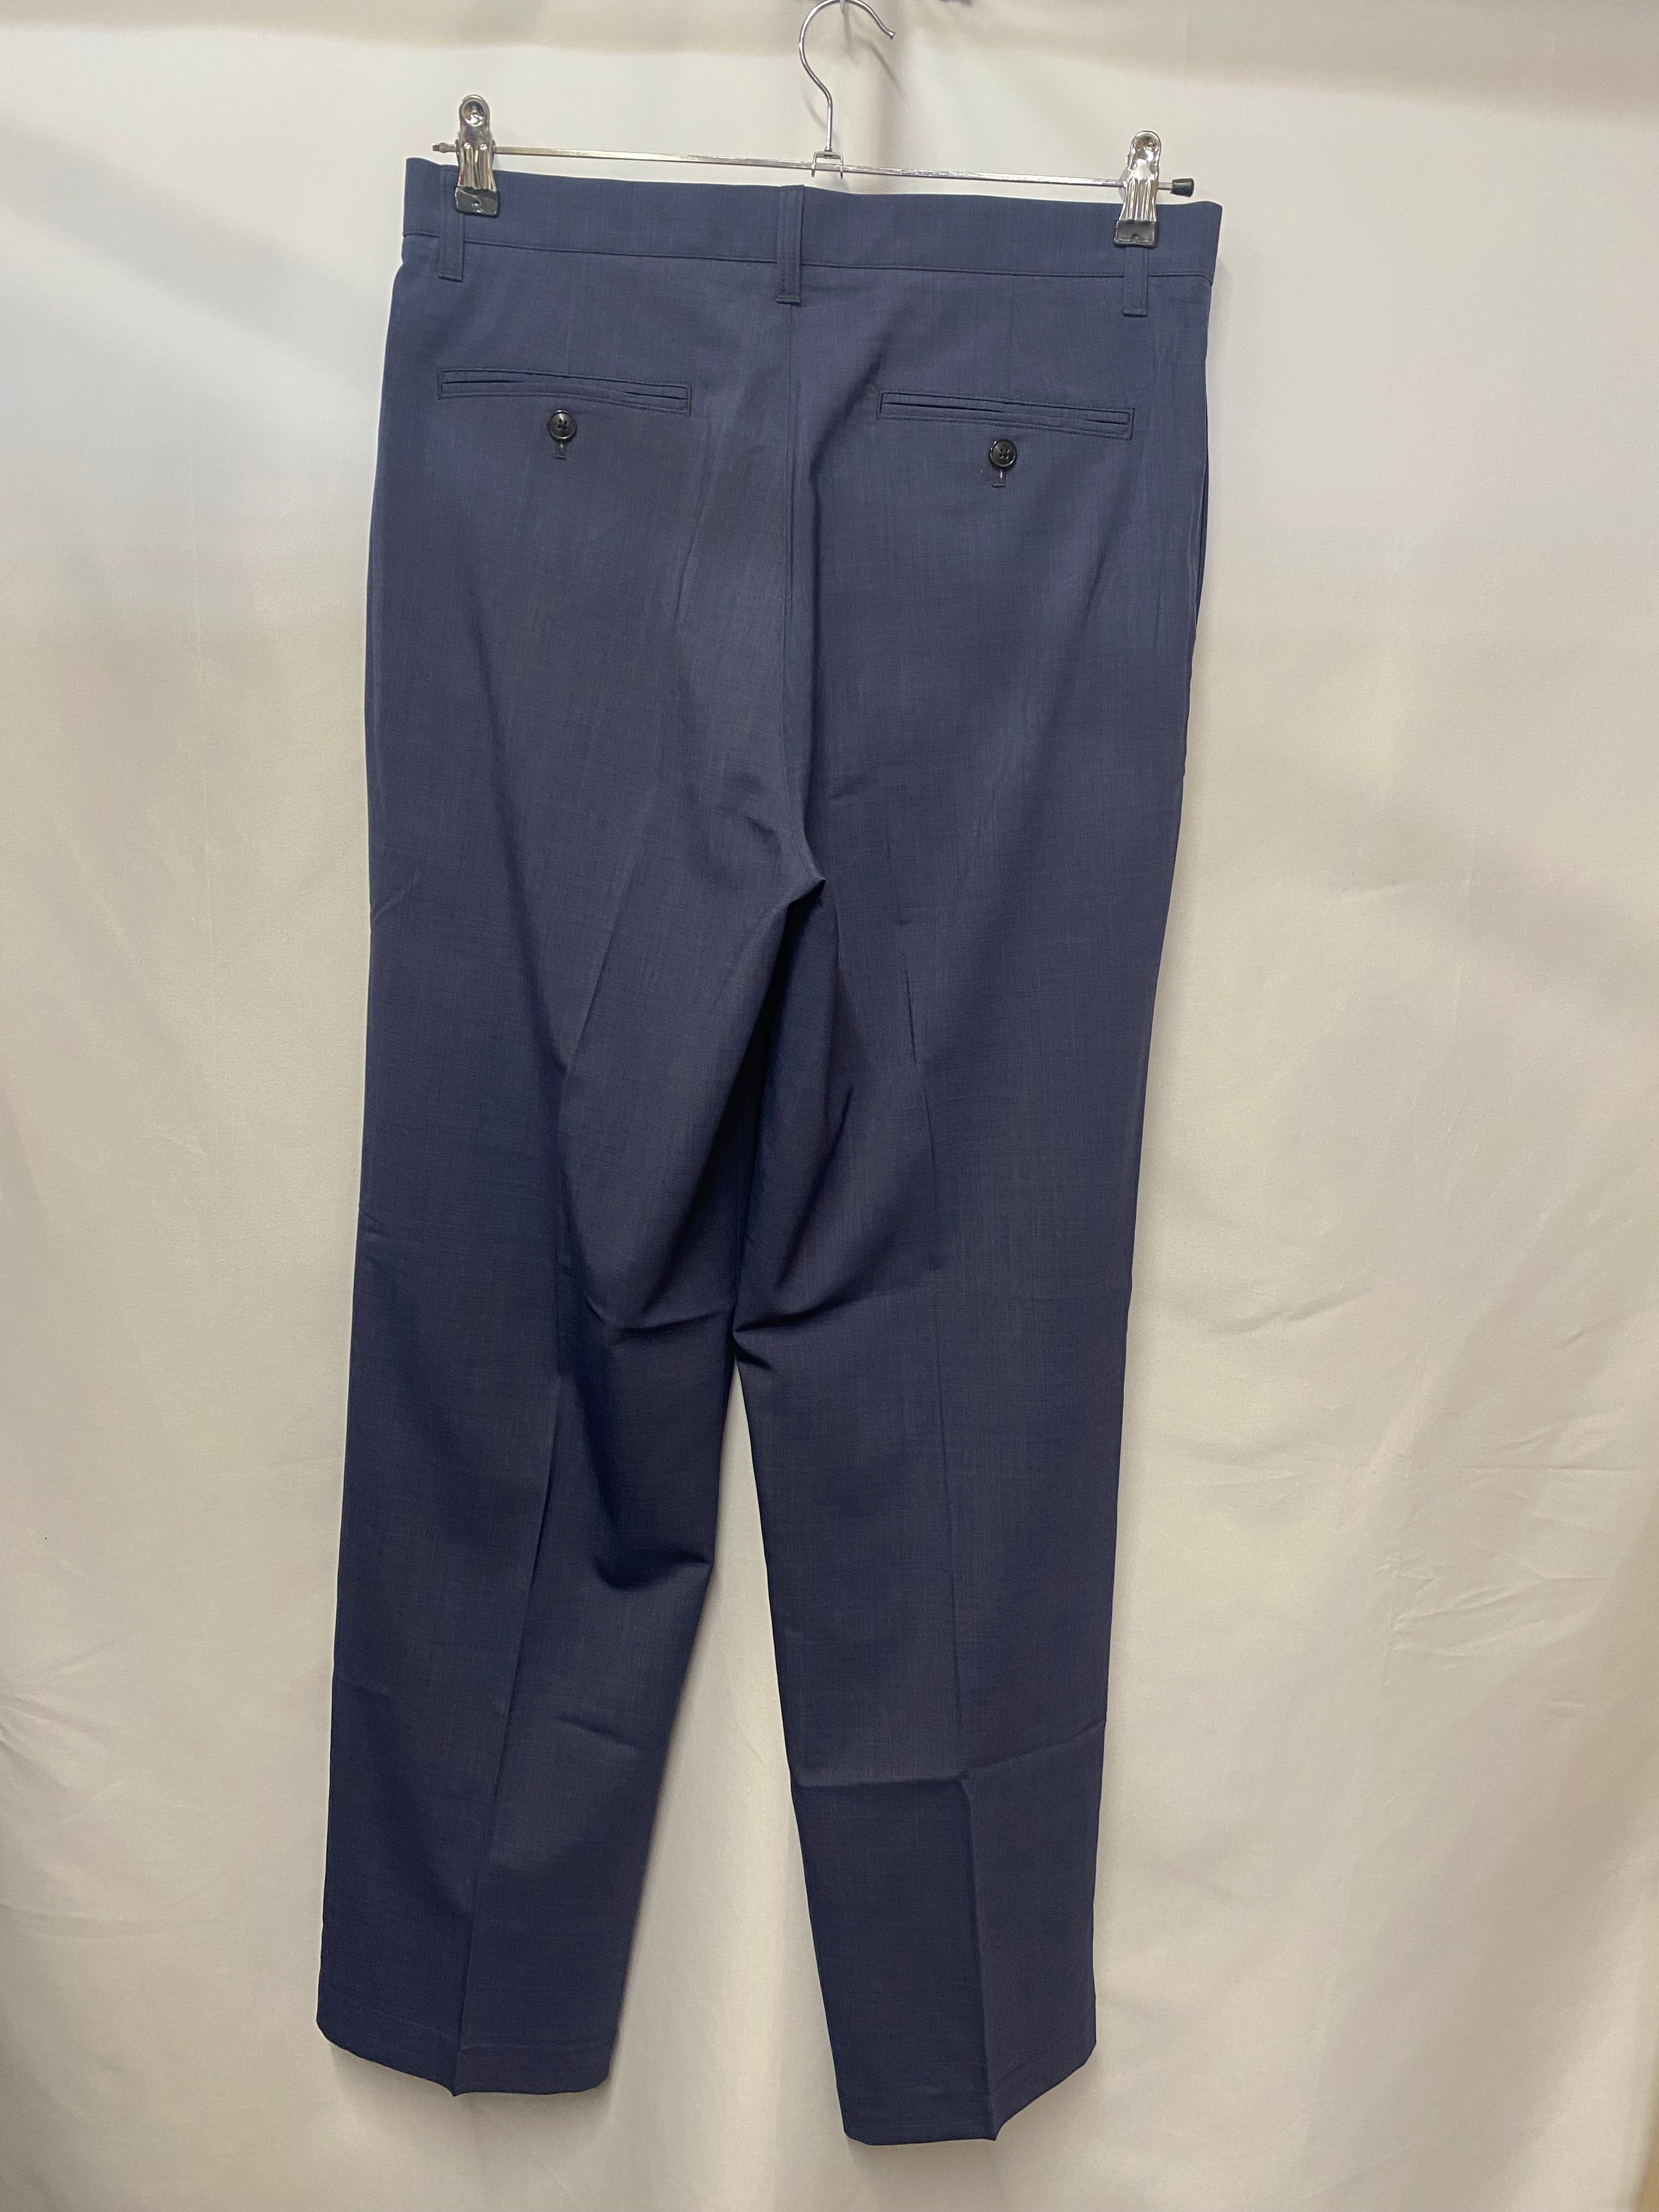 Basic Rights Trousers Review | The Styleforum JournalThe Styleforum Journal  | Trousers, Buy clothes, Quality clothing